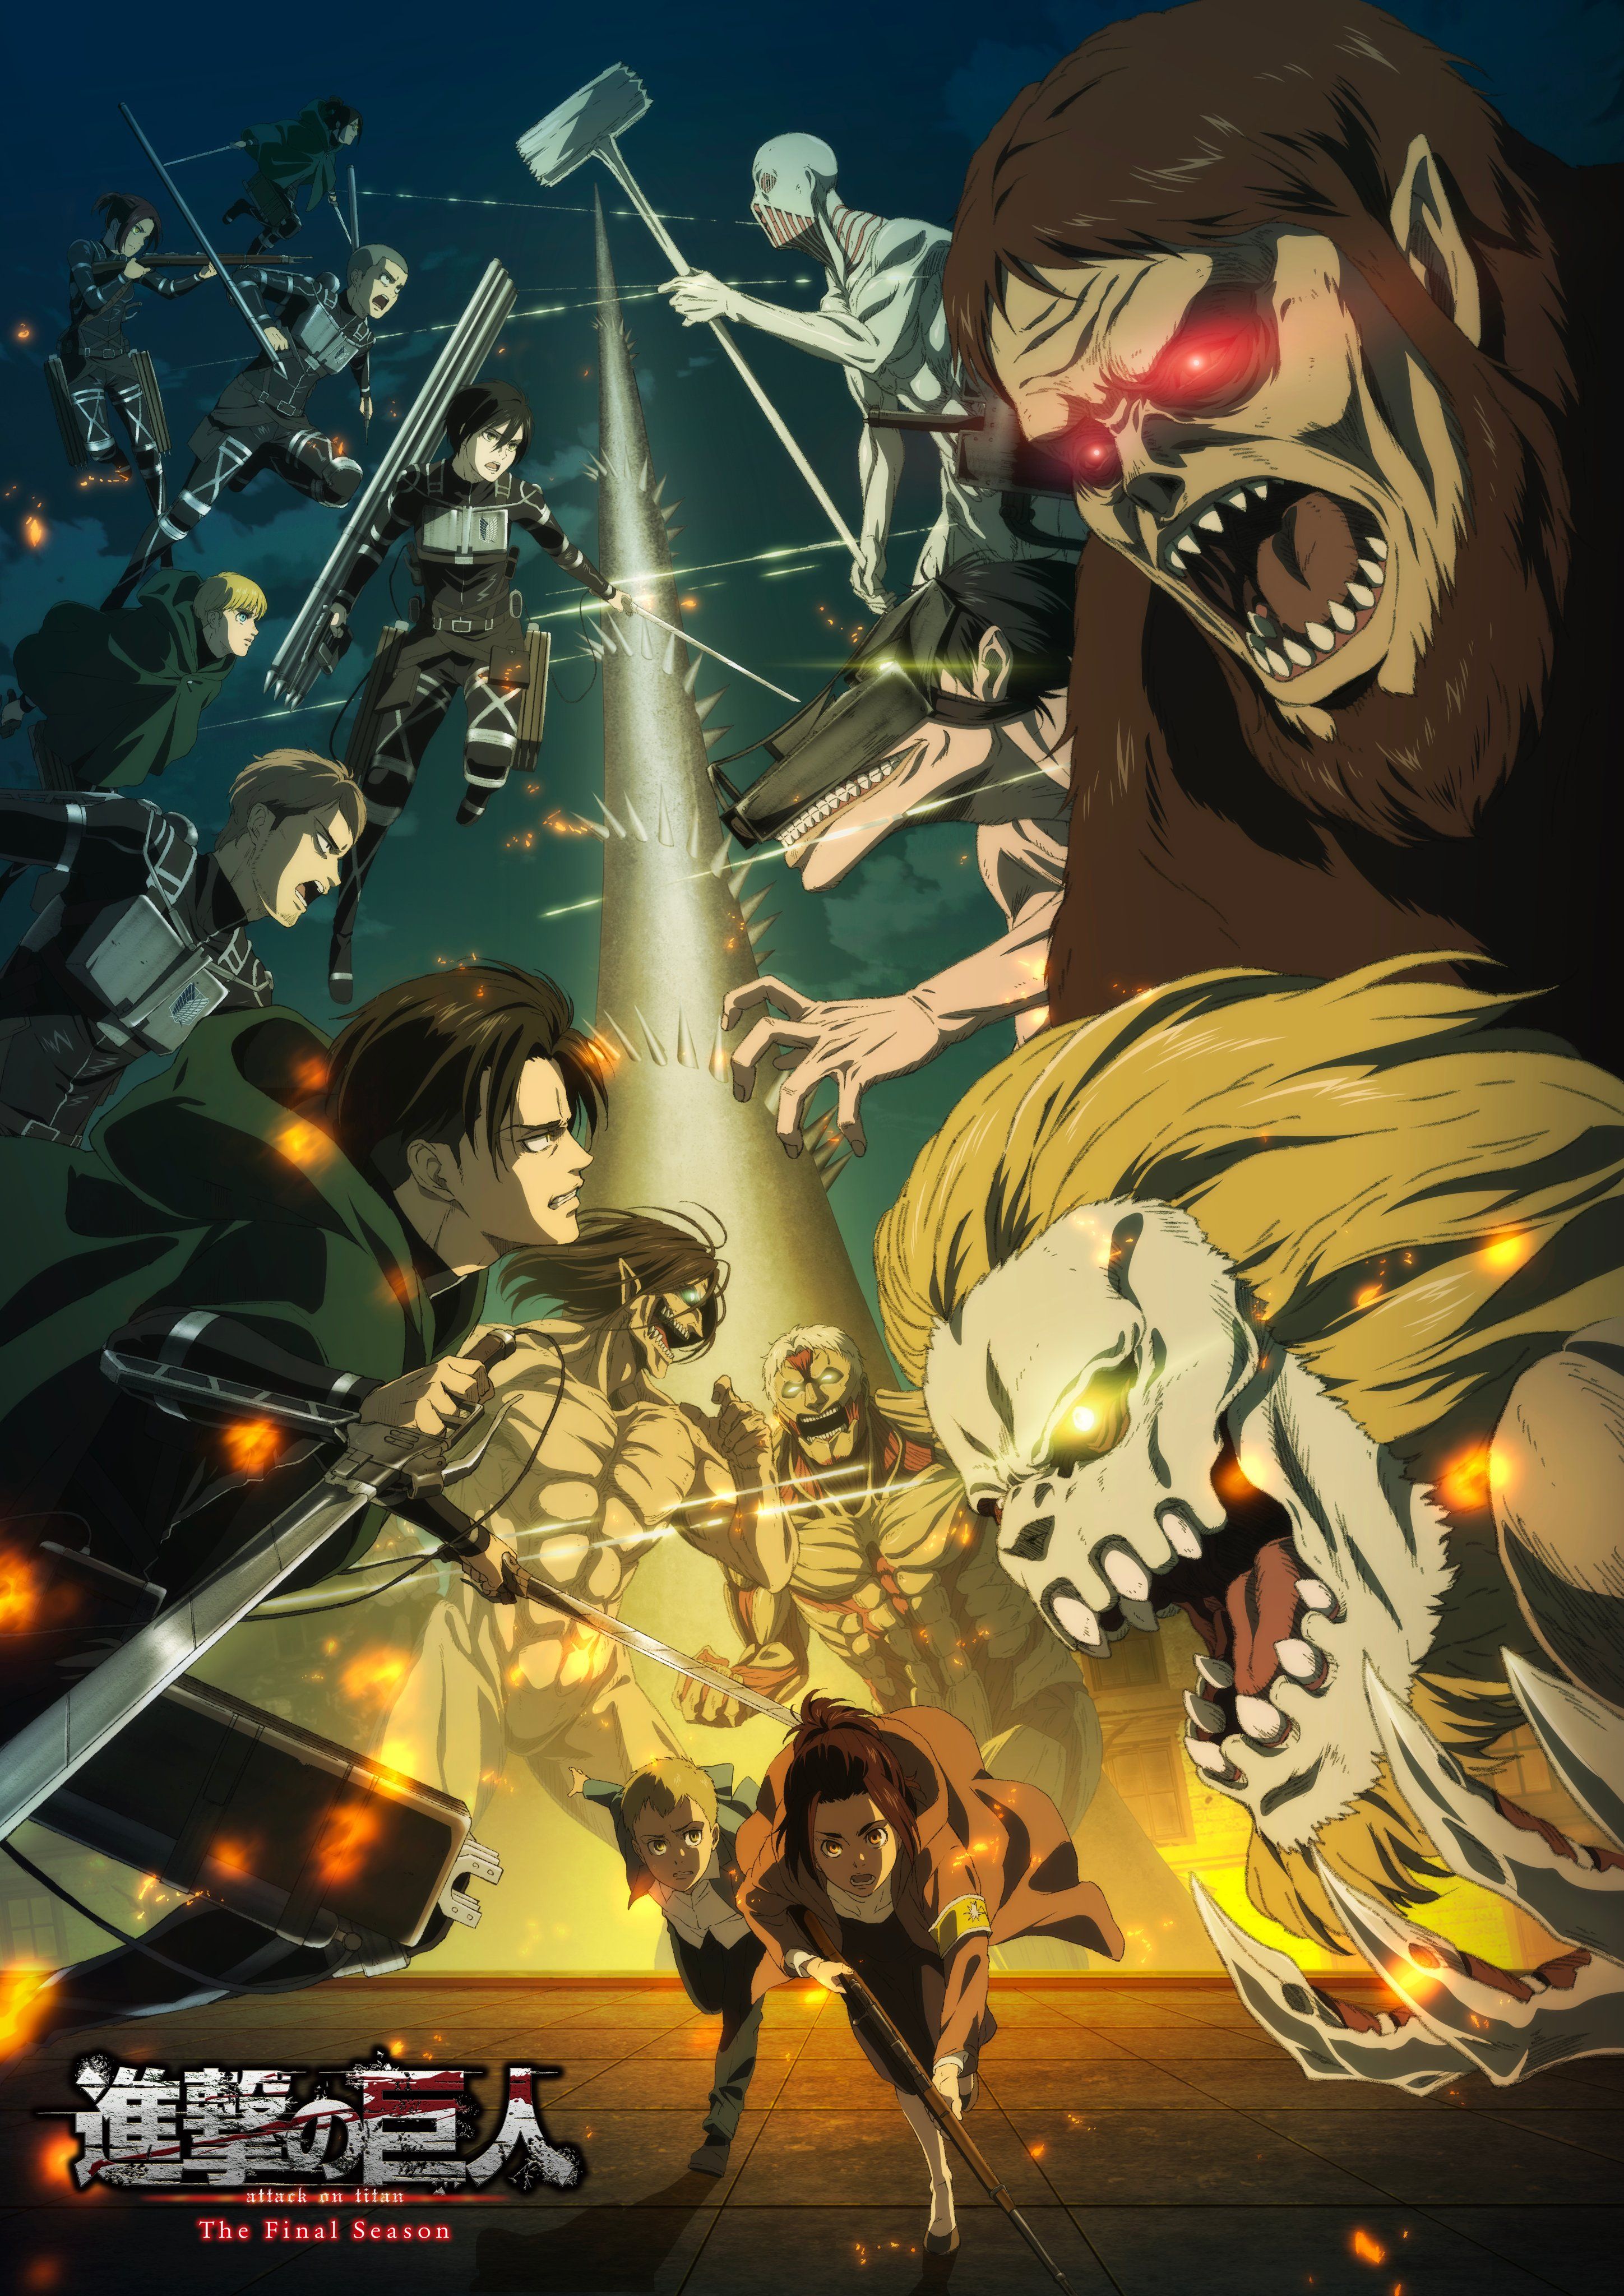 Attack on Titan' Final Season's Episodes 14 and 15 to Air Sunday Following Delay